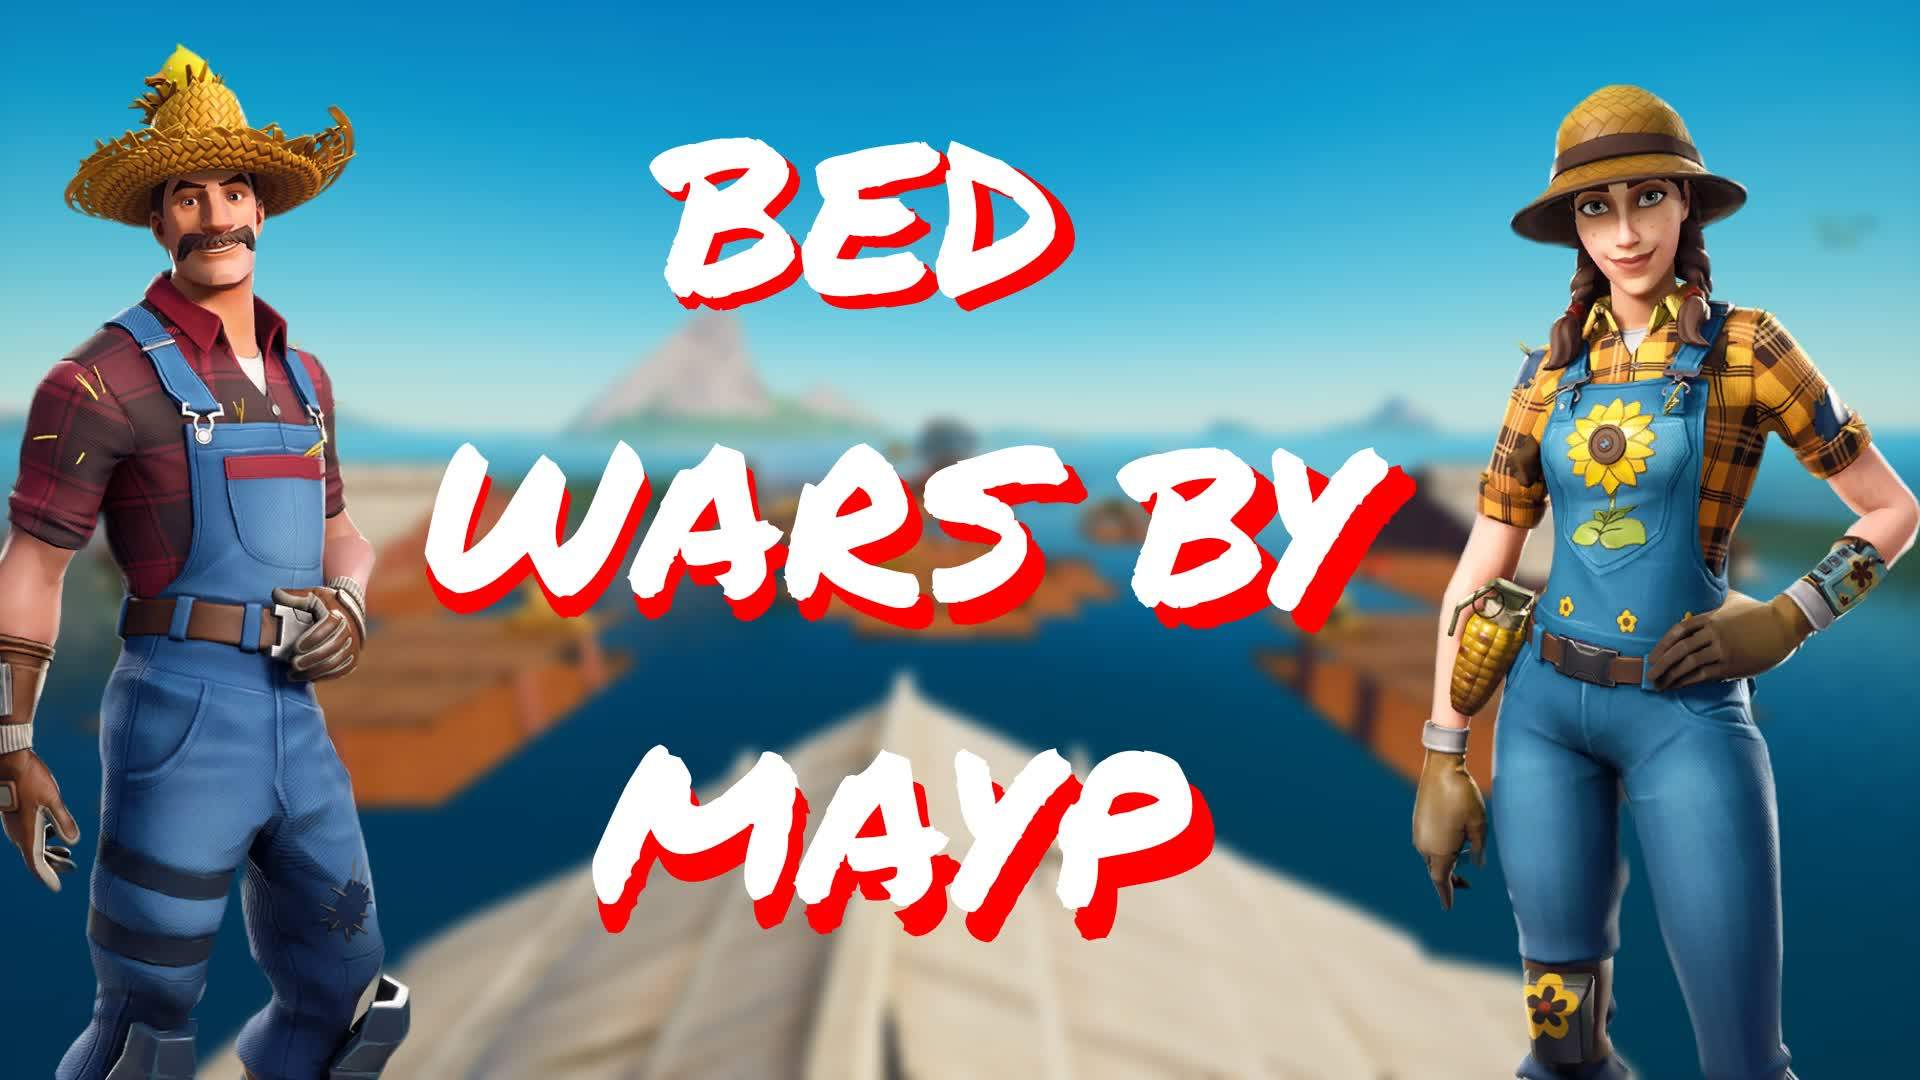 BED WARS IN RUSSIAN BY MAYP